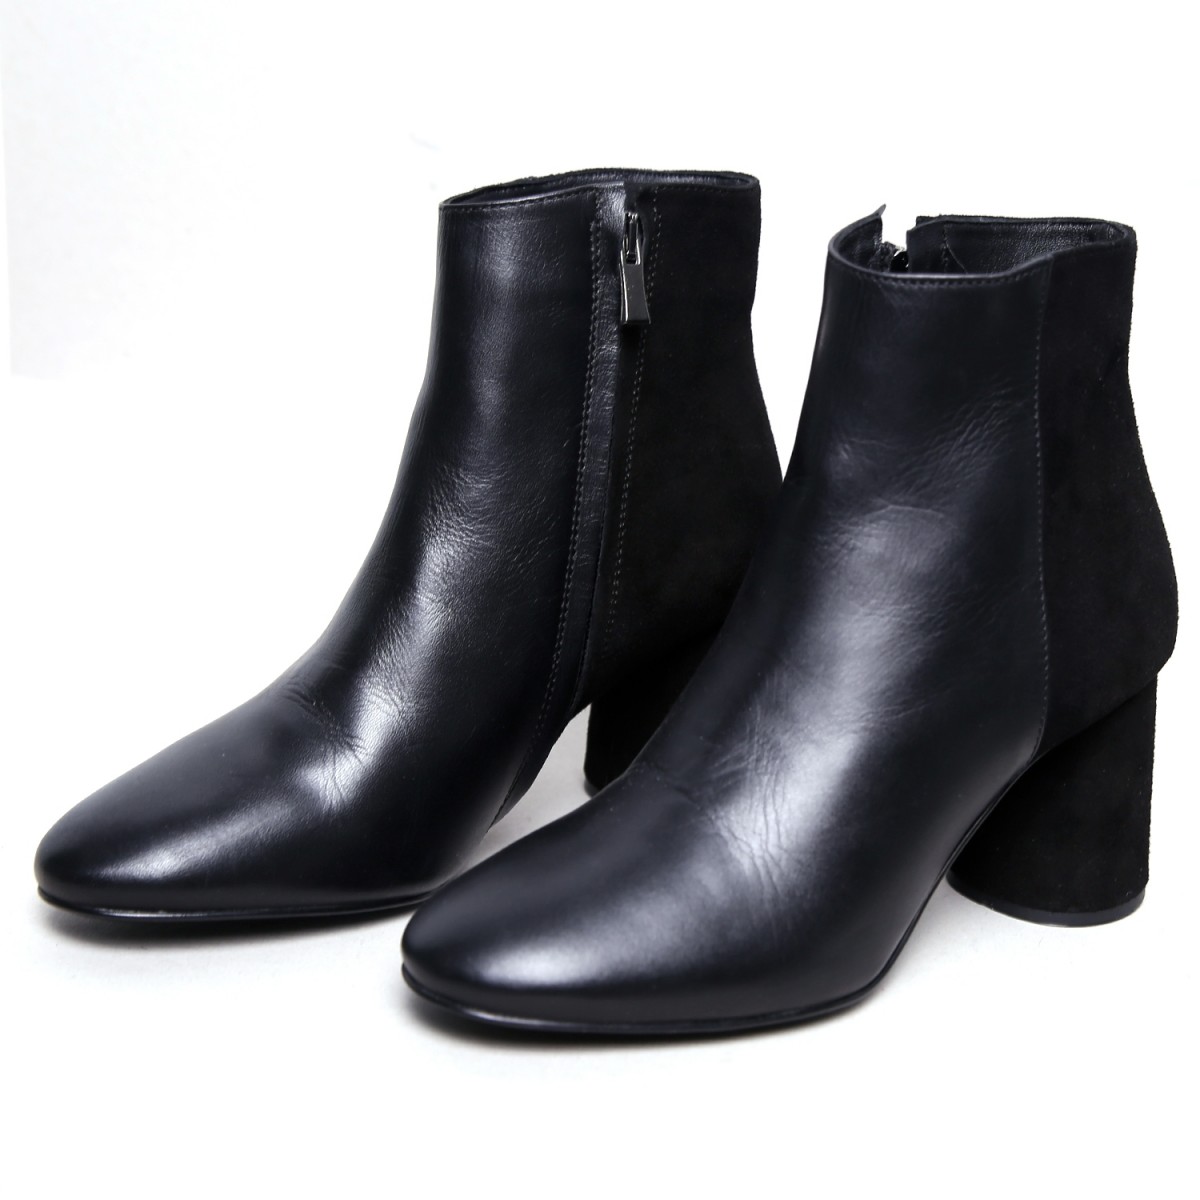 Boots bimatière à Talon Boots bimatière à Talon Hamadi Abid nouvelle collection 2020